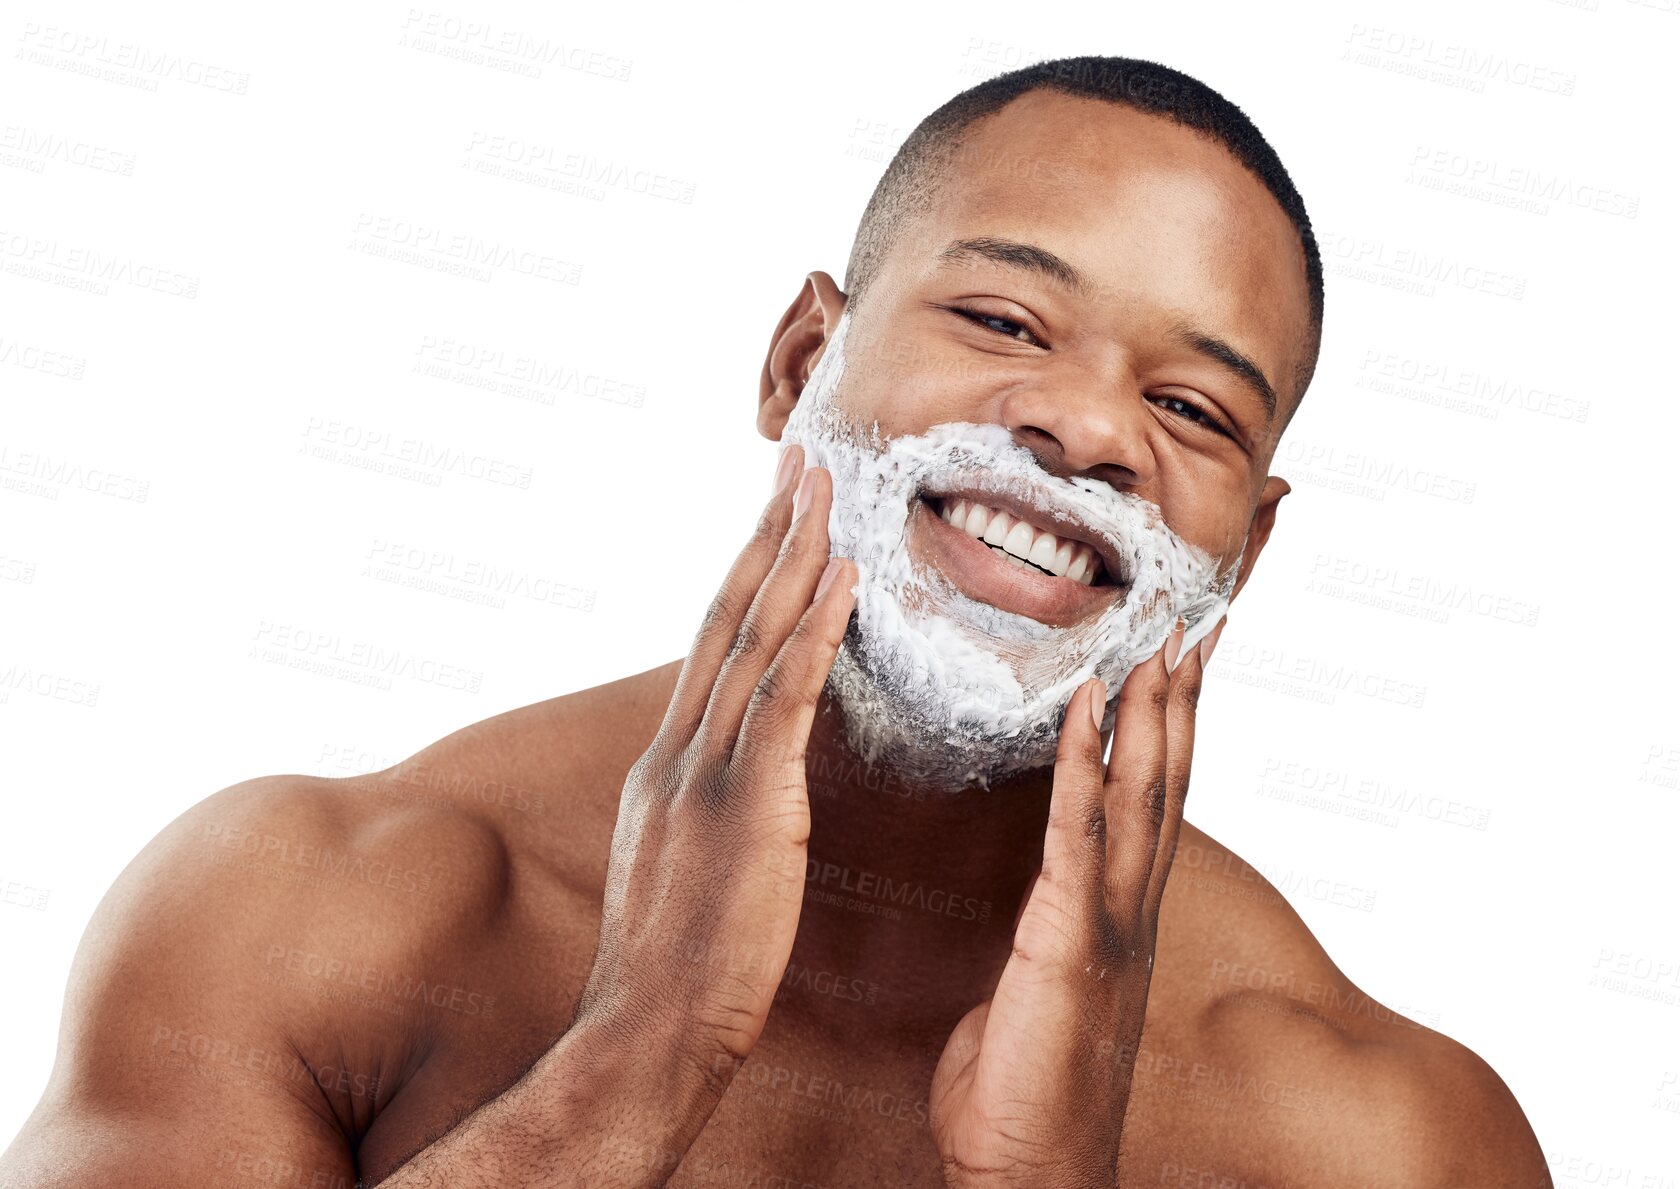 Buy stock photo Portrait, man and shaving cream on face for skincare, grooming or morning routine on transparent, isolated or png background, Shave, beard and male model with product for facial treatment or beauty